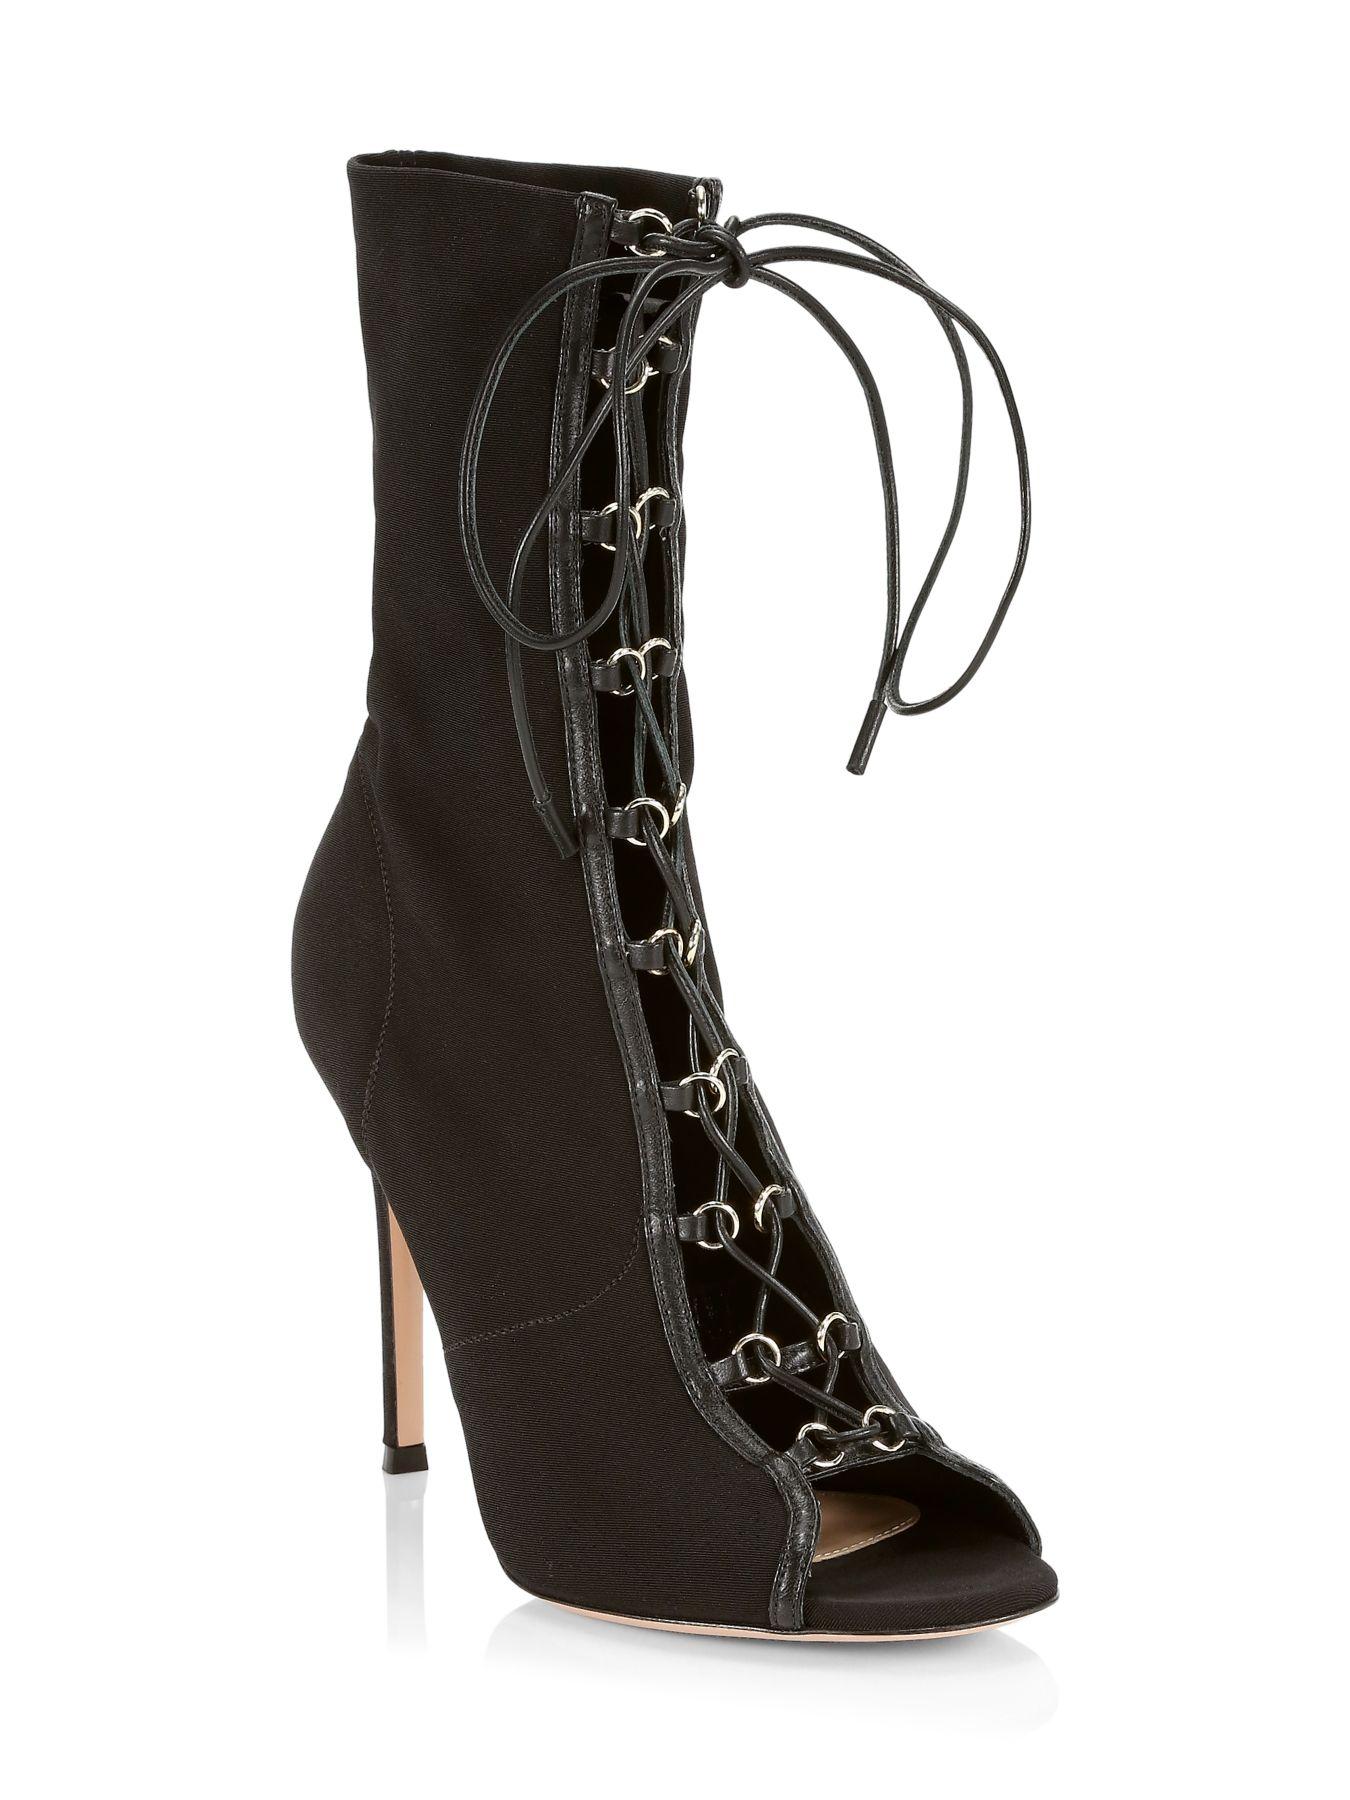 Gianvito Rossi Leather Lenoir Lace-up Peep-toe Booties in Black - Lyst